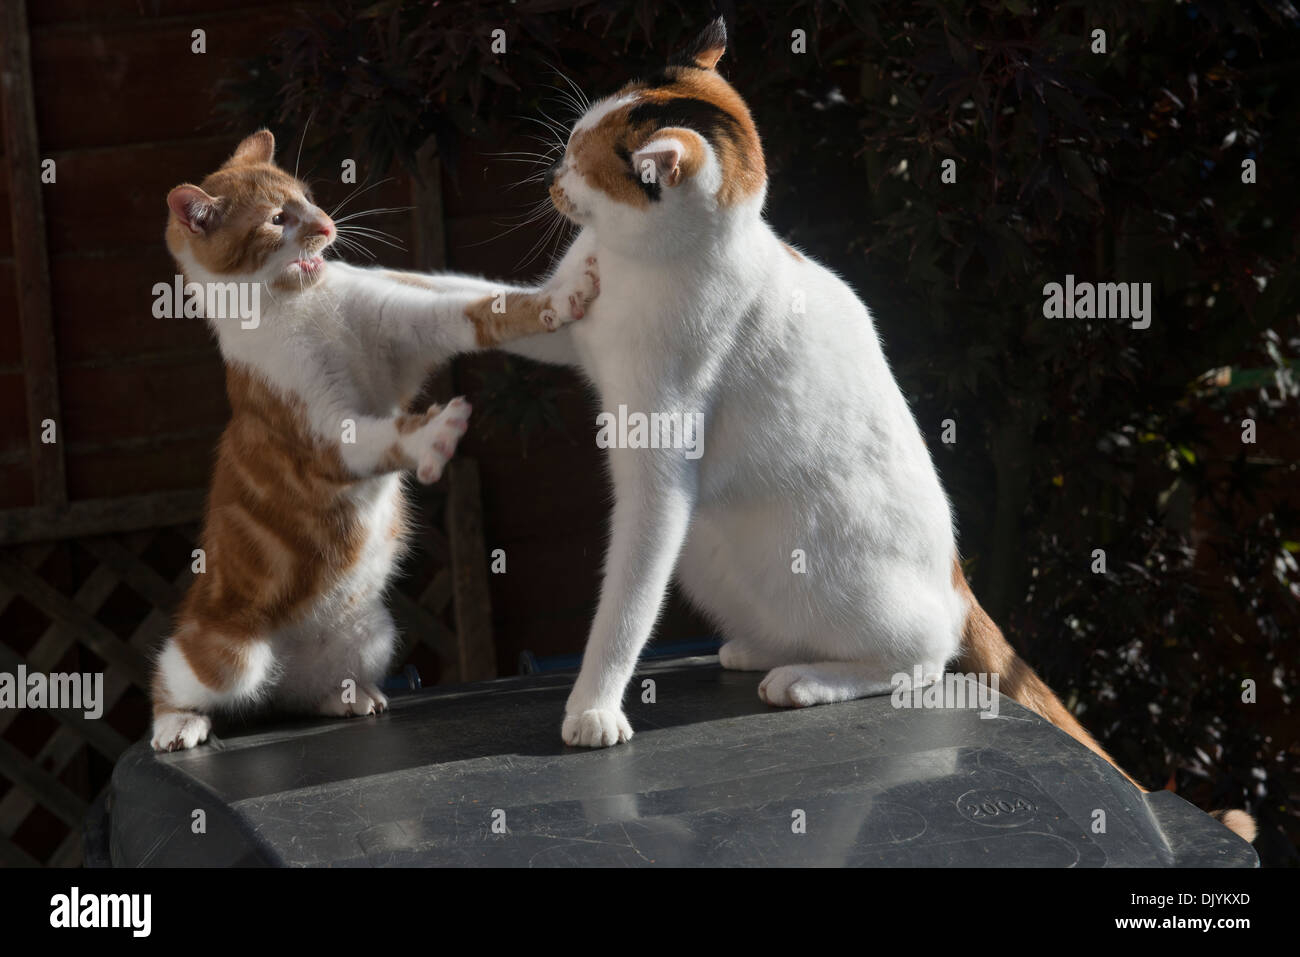 Two cats play fighting. Stock Photo